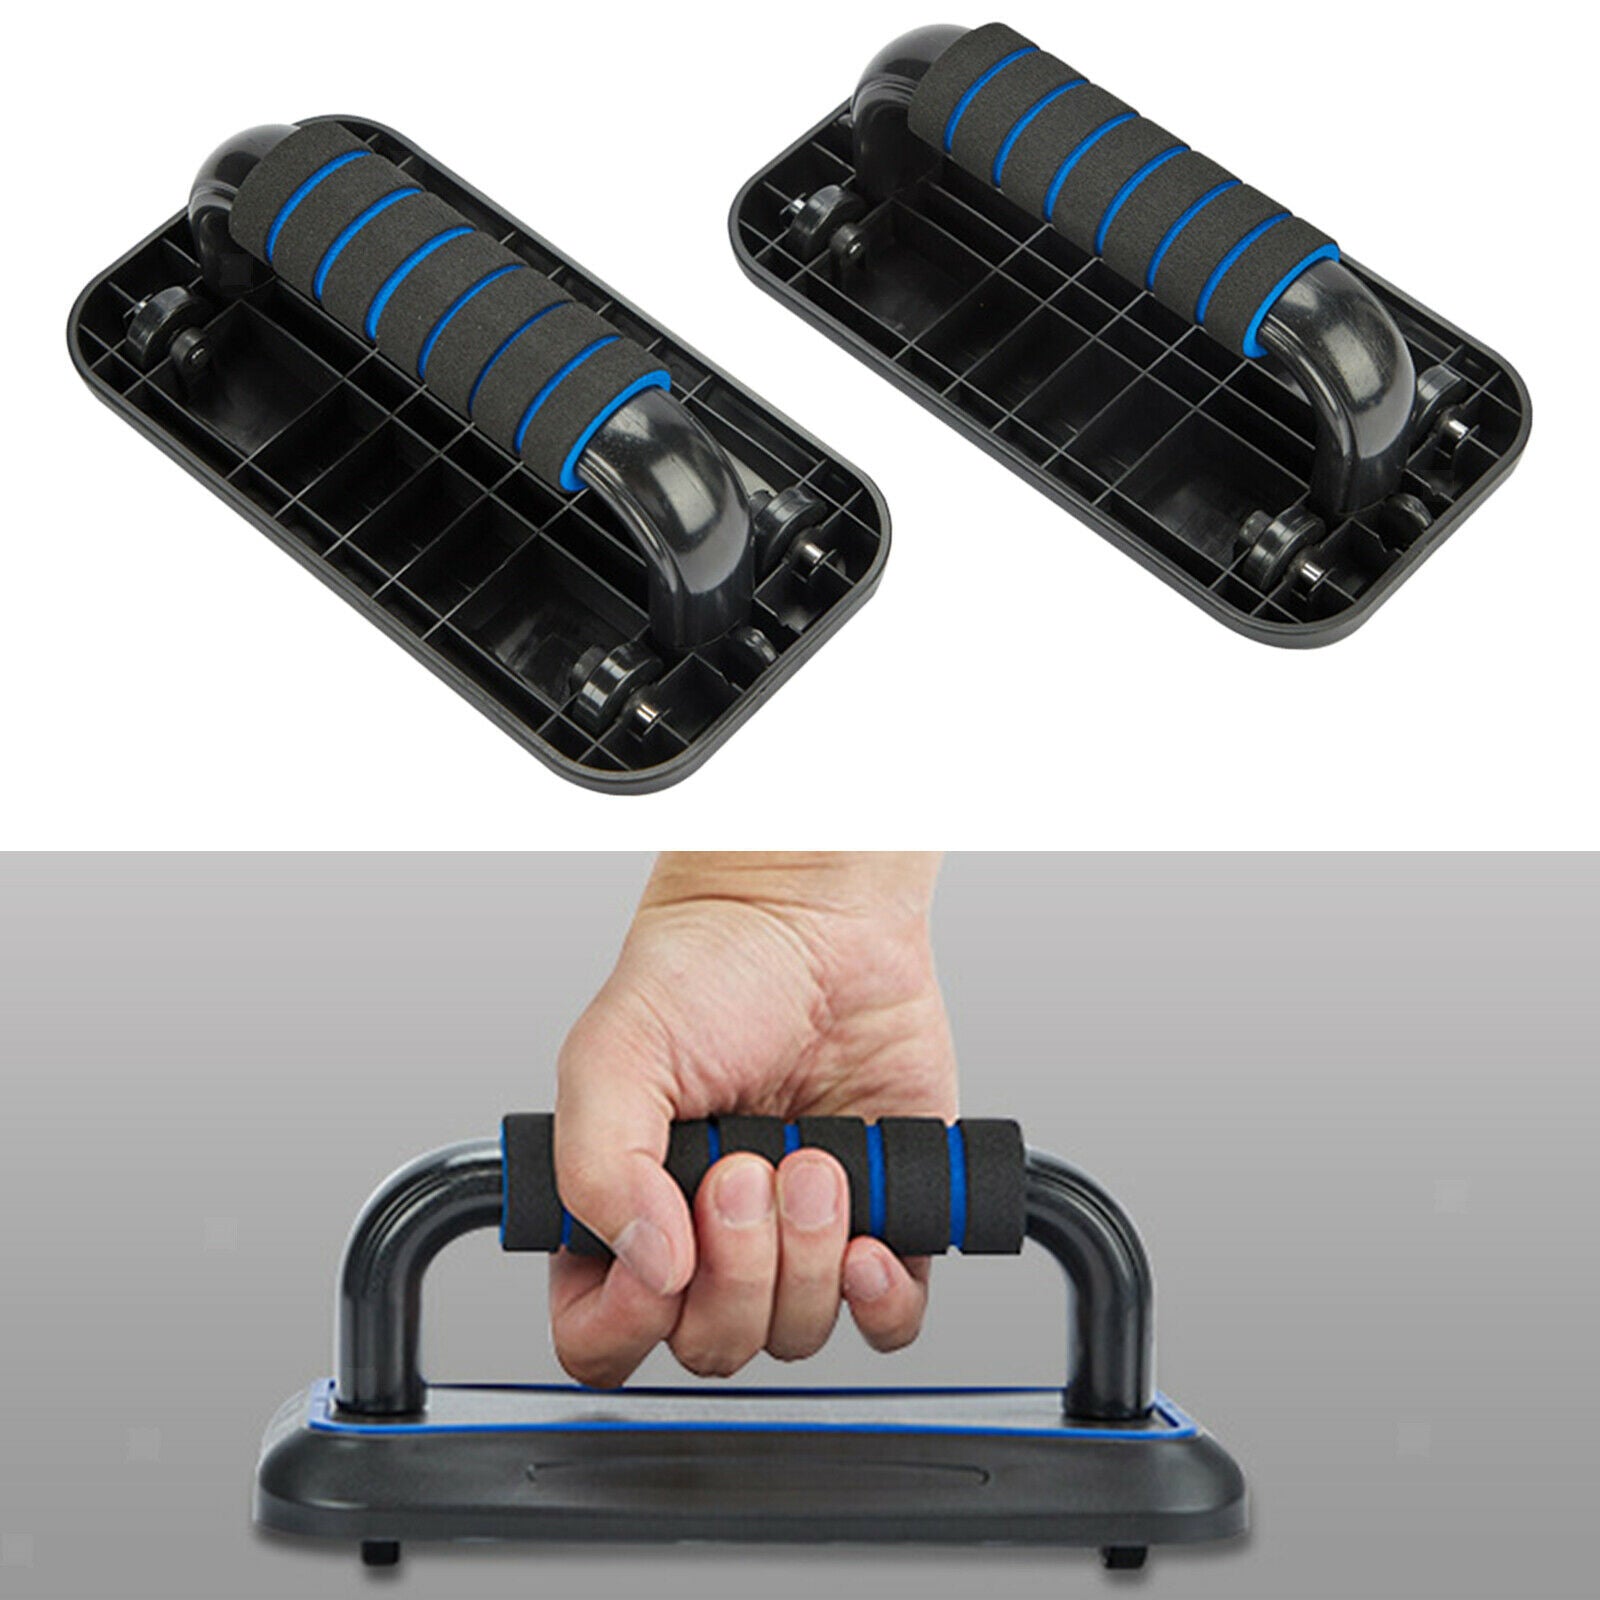 Push Up Bars for Home Fitness - Great Foam Handle Pad Grips Equipment for